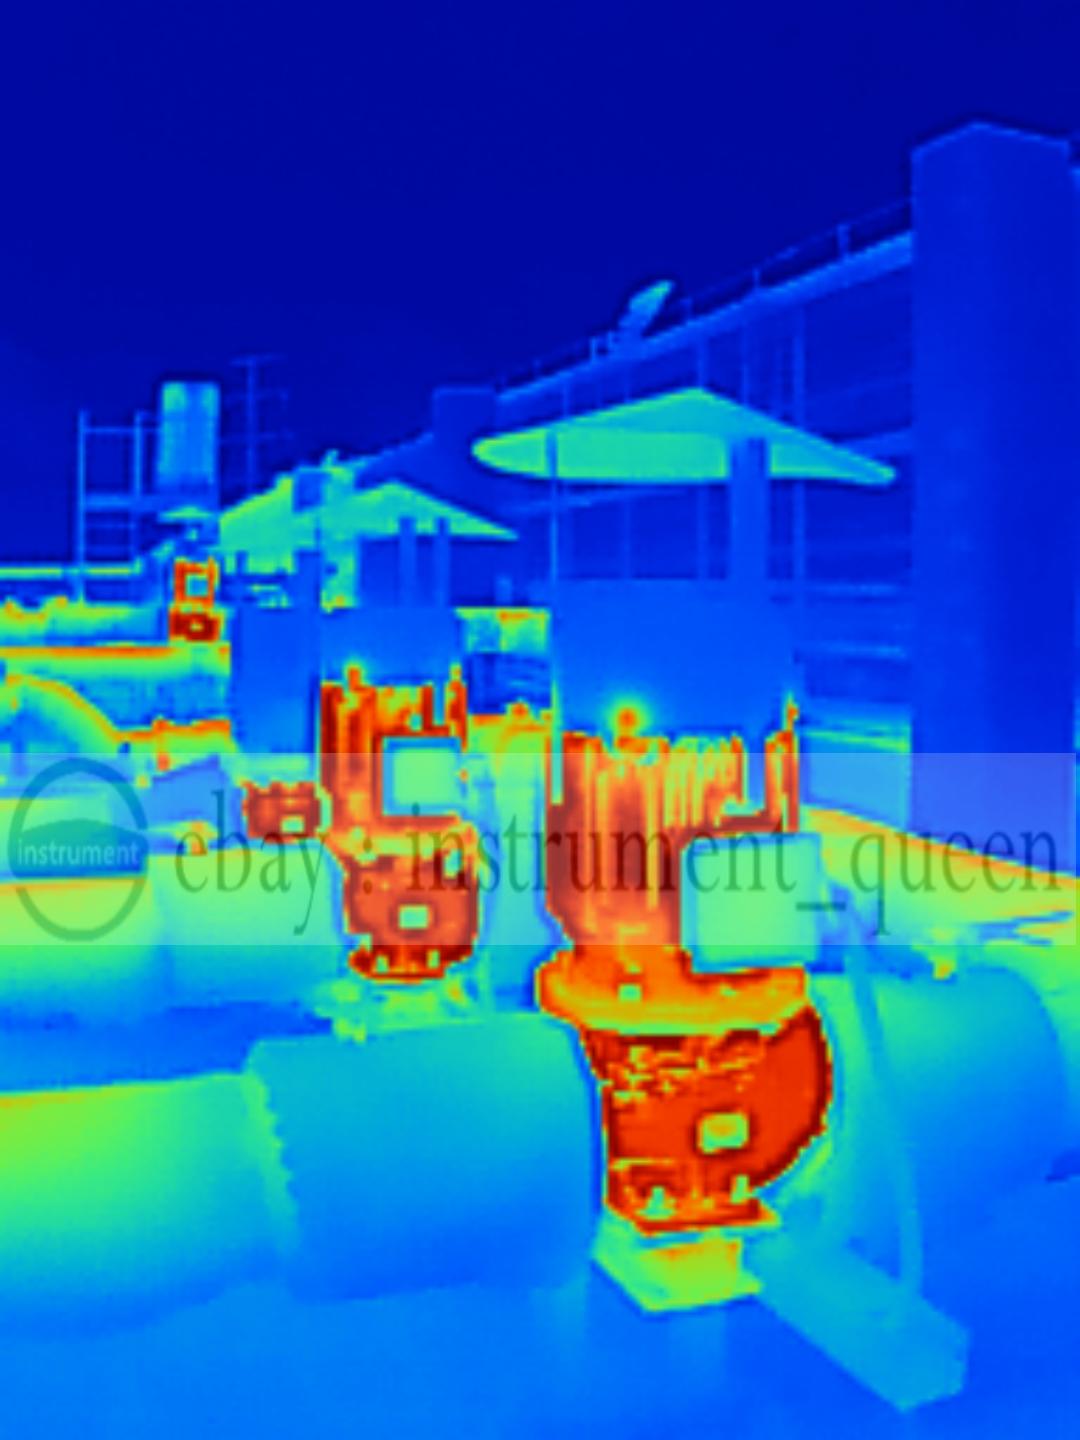 Unseen Power in Your Pocket: Introducing the Fluke iSee™ Mobile Thermal  Camera For Andriod 